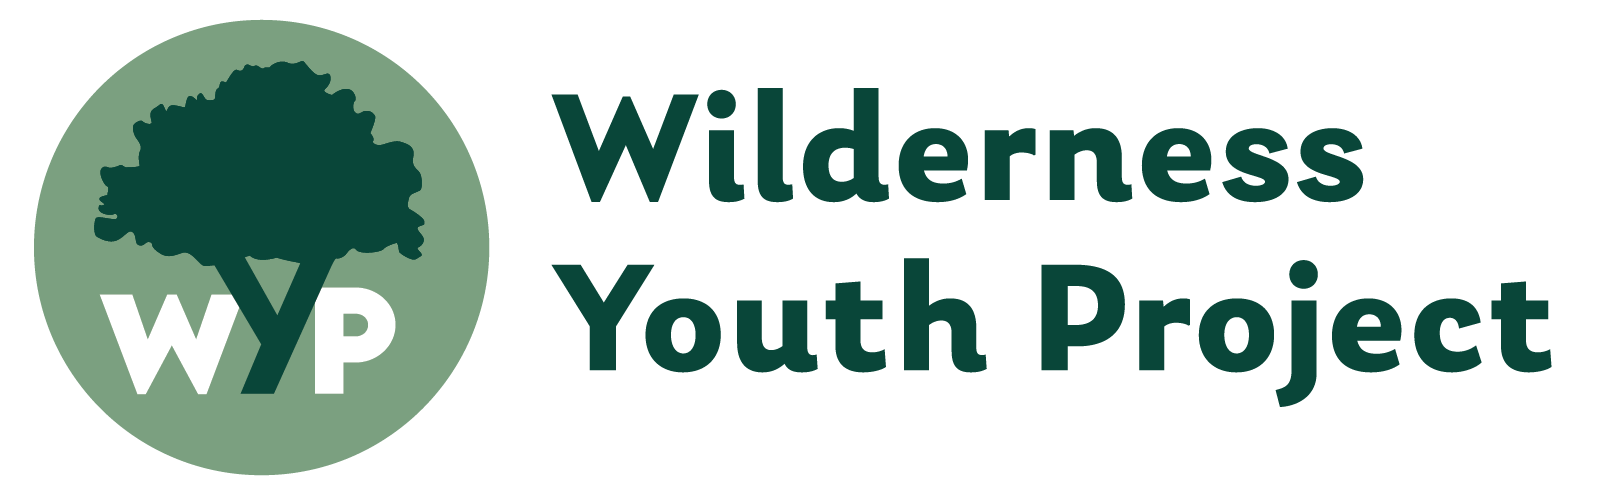 Logótipo do Wilderness Youth Project